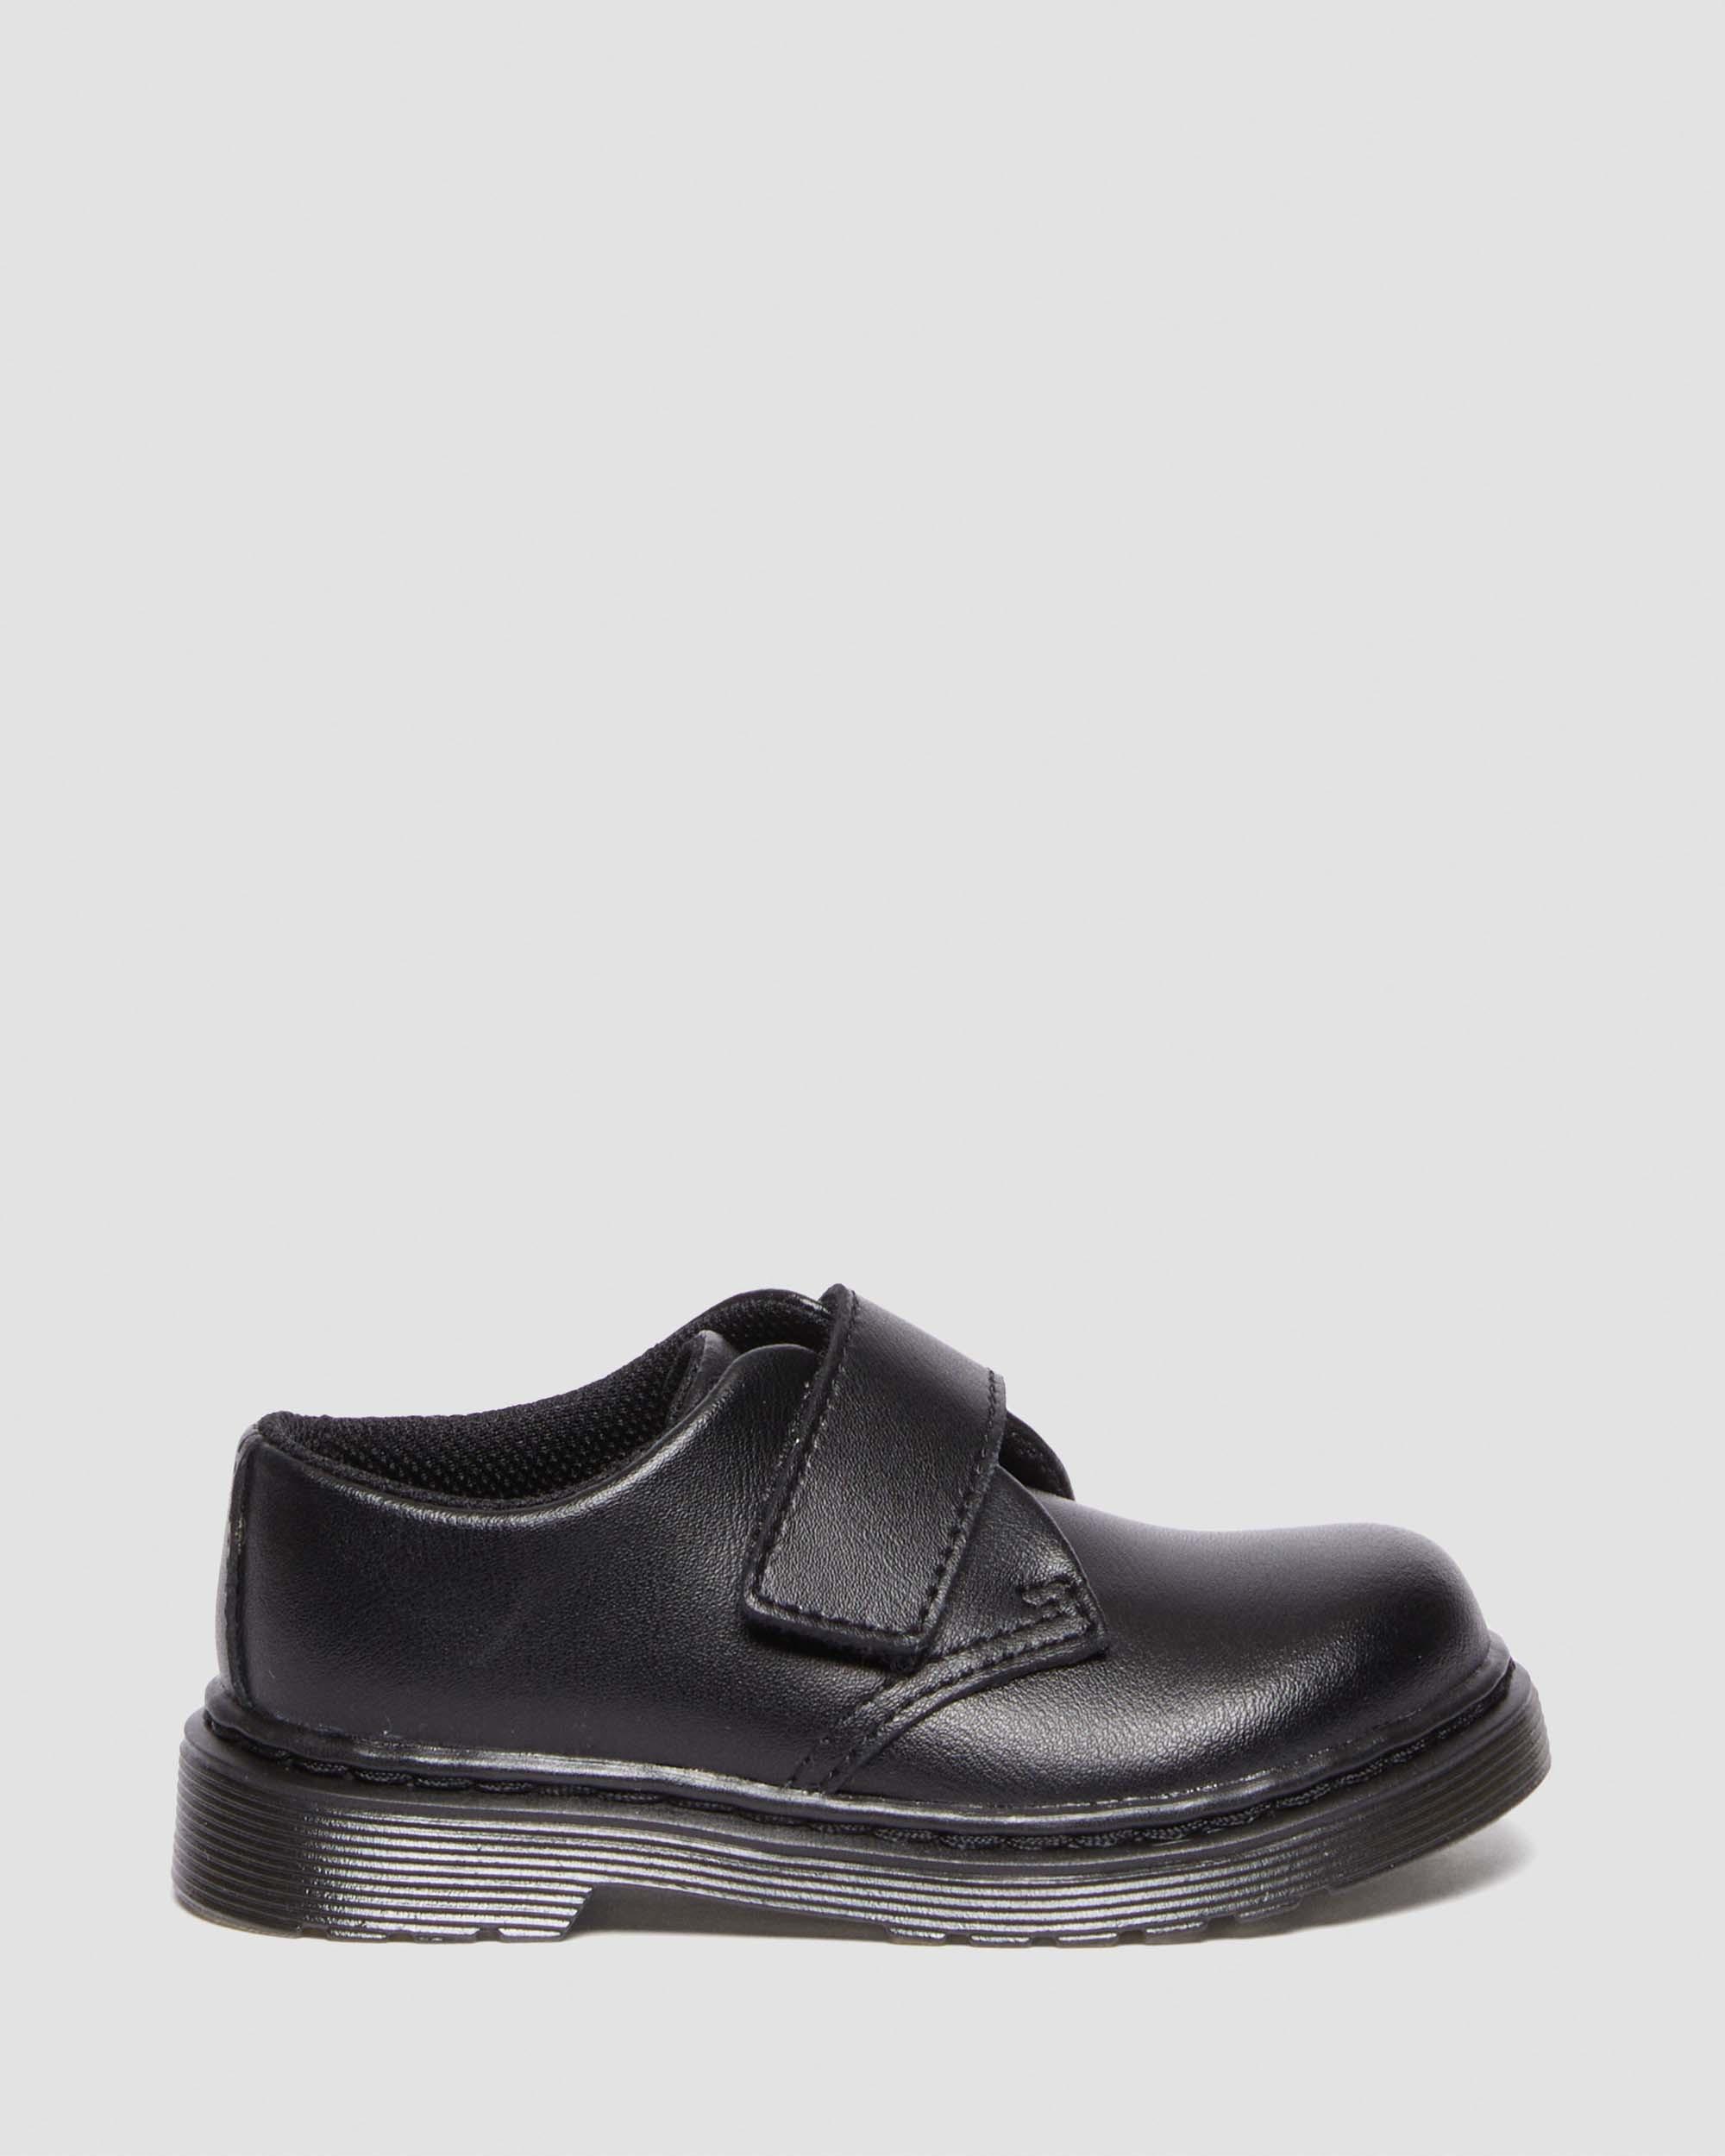 Toddler Kamron Leather Strap Velcro Oxford Shoes in Black